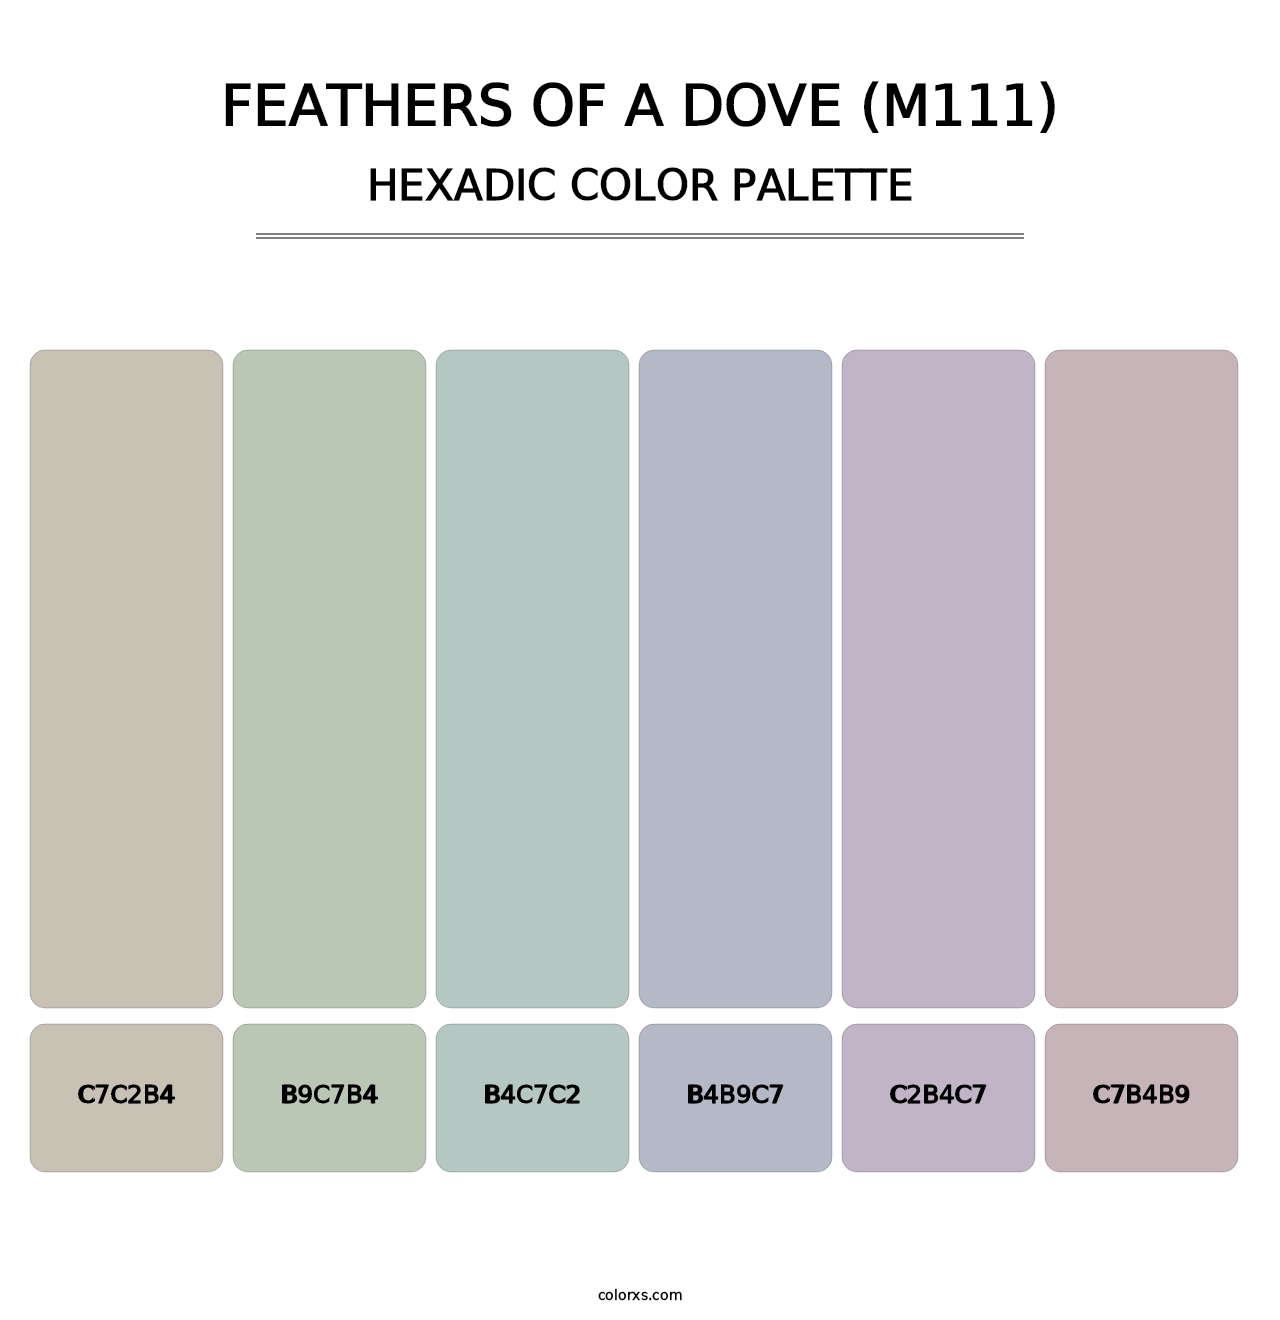 Feathers of a Dove (M111) - Hexadic Color Palette